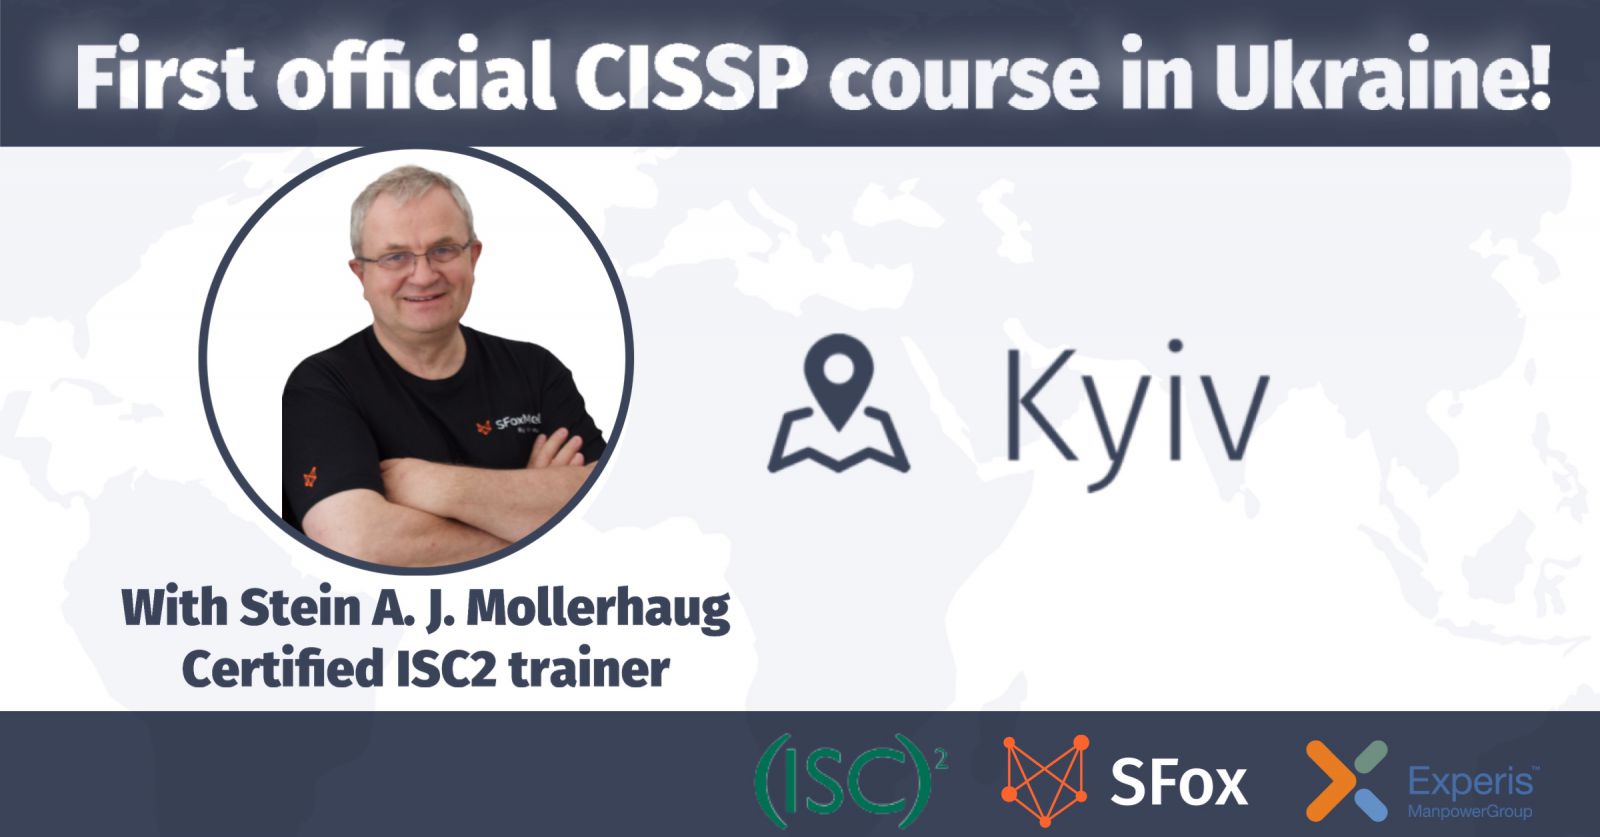 CISSP Training (Training to become a CISSP (Certified Information Systems Security Professional)